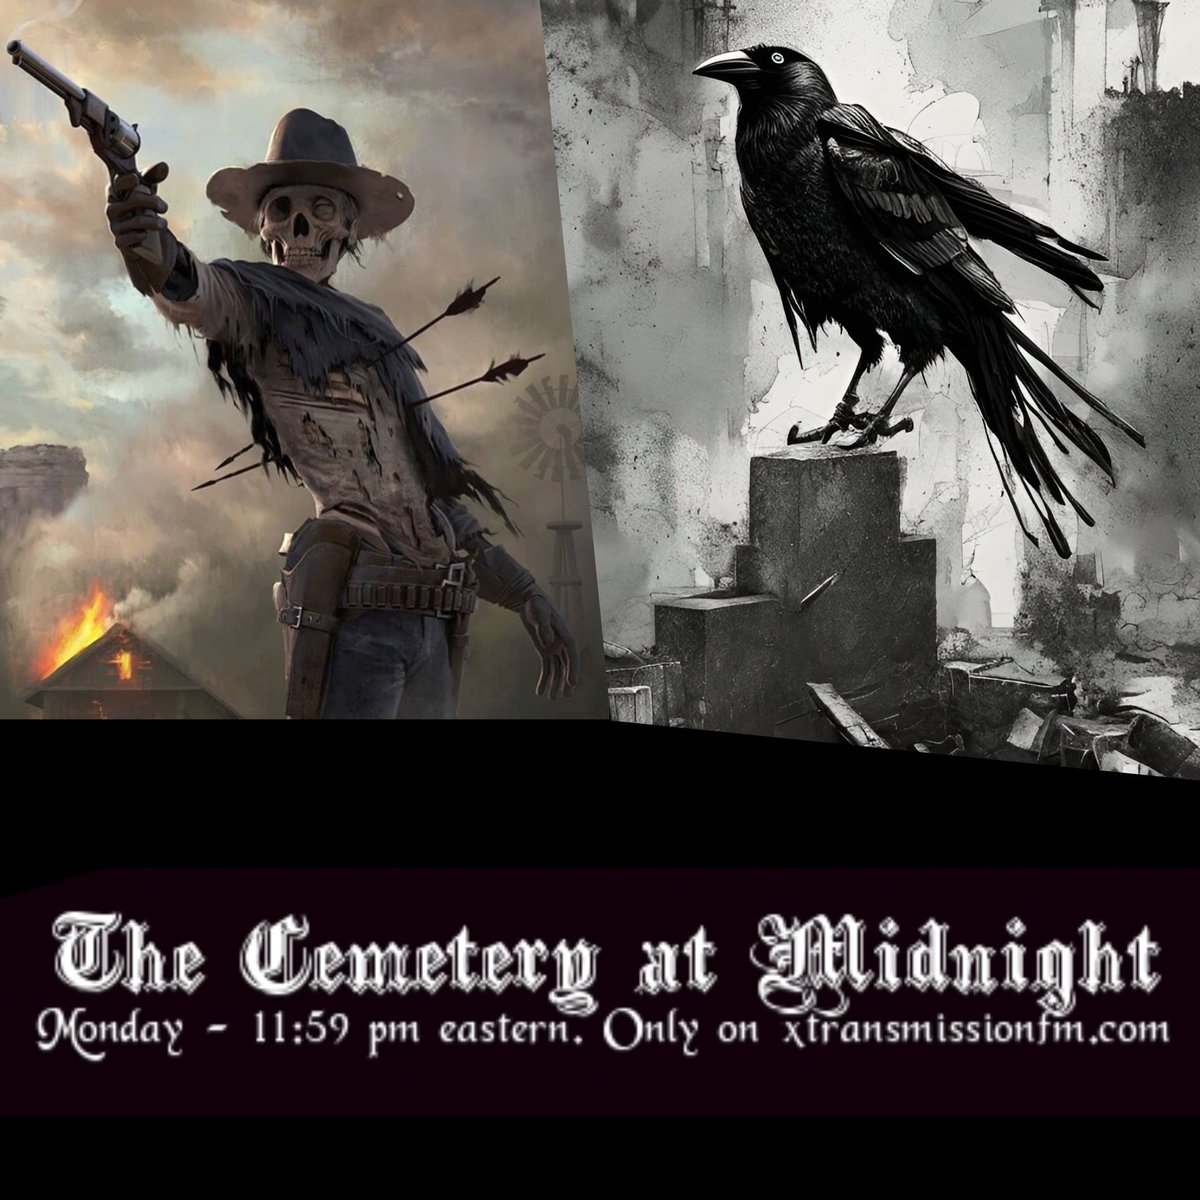 Tonight in the Cemetery, we'll be sampling some of the world's finest #country #darkroots and #goth, plus we'll get caught up with movie news, chat live with the dj and pals, and a whole lot more. Join us at 11:59 pm eastern on xtransmissionfm.com.